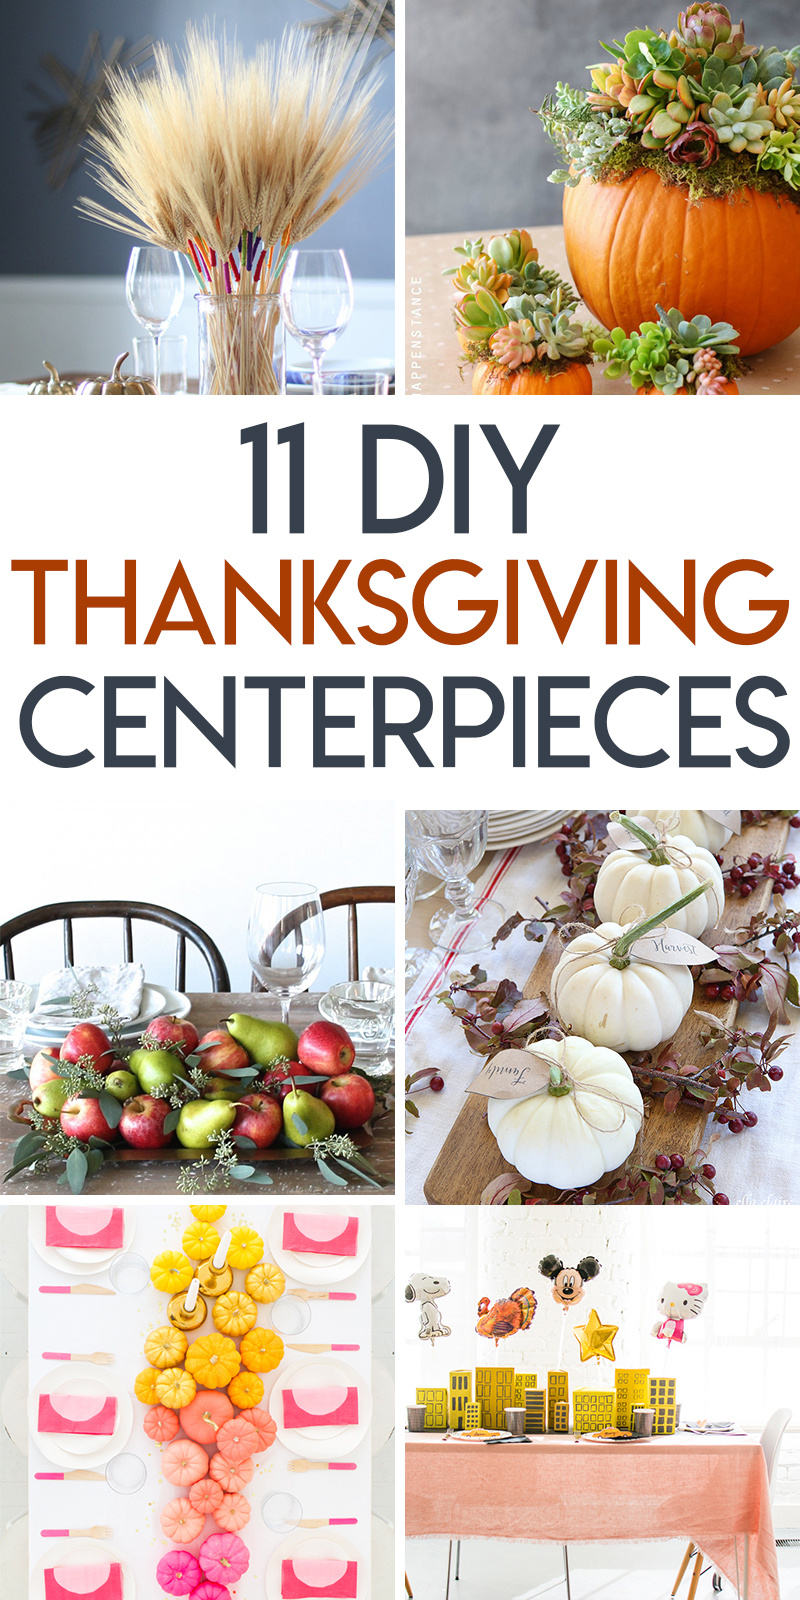 11 Beautiful DIY Thanksgiving Centerpieces | Random Acts of Crafts